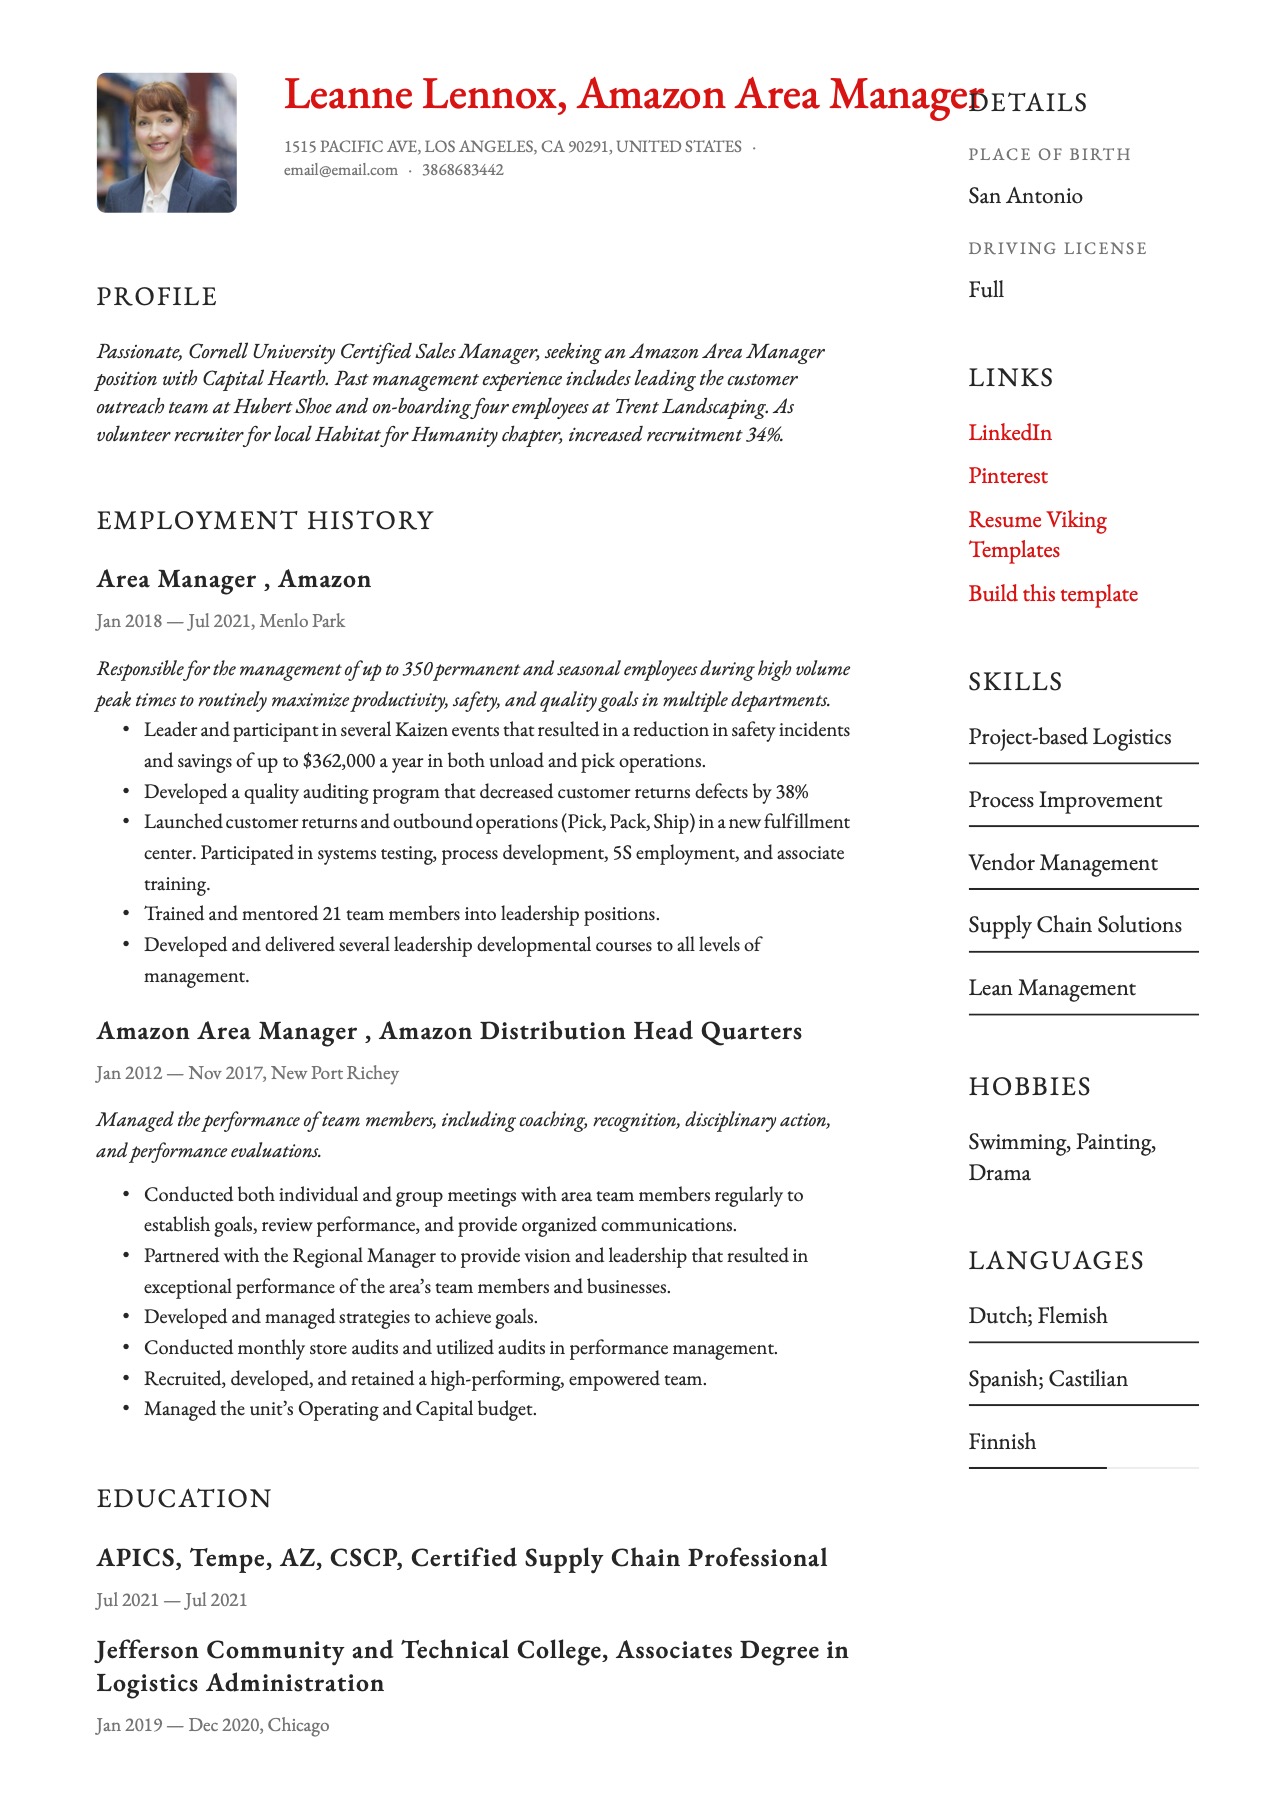 Amazon Area Manager Resume Template